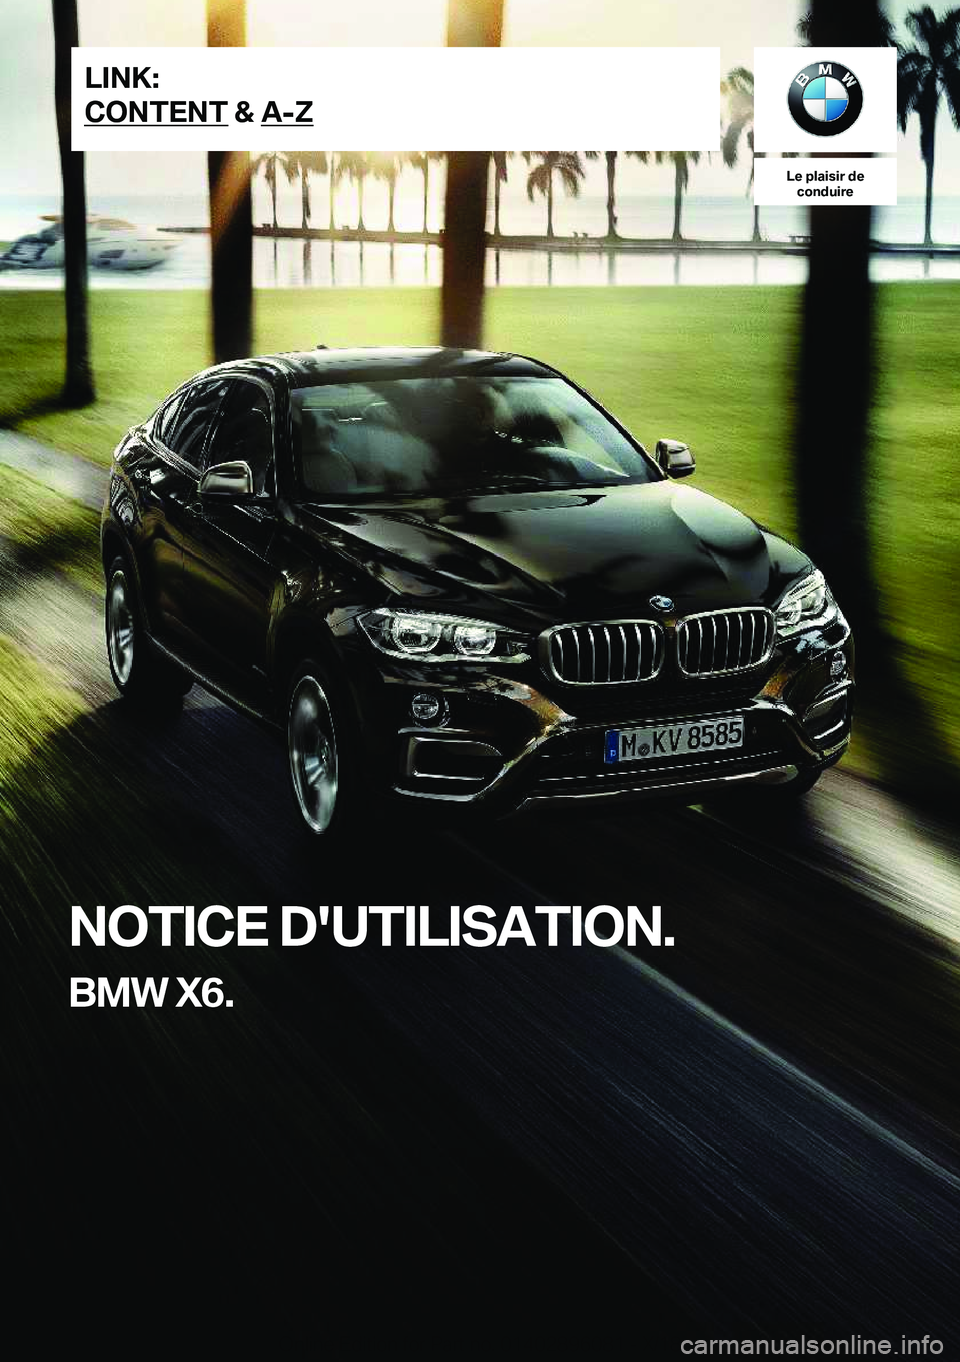 BMW X6 2019  Notices Demploi (in French) �L�e��p�l�a�i�s�i�r��d�e�c�o�n�d�u�i�r�e
�N�O�T�I�C�E��D�'�U�T�I�L�I�S�A�T�I�O�N�.
�B�M�W��X�6�.�L�I�N�K�:
�C�O�N�T�E�N�T��&��A�-�Z�O�n�l�i�n�e��E�d�i�t�i�o�n��f�o�r��P�a�r�t��n�o�.��0�